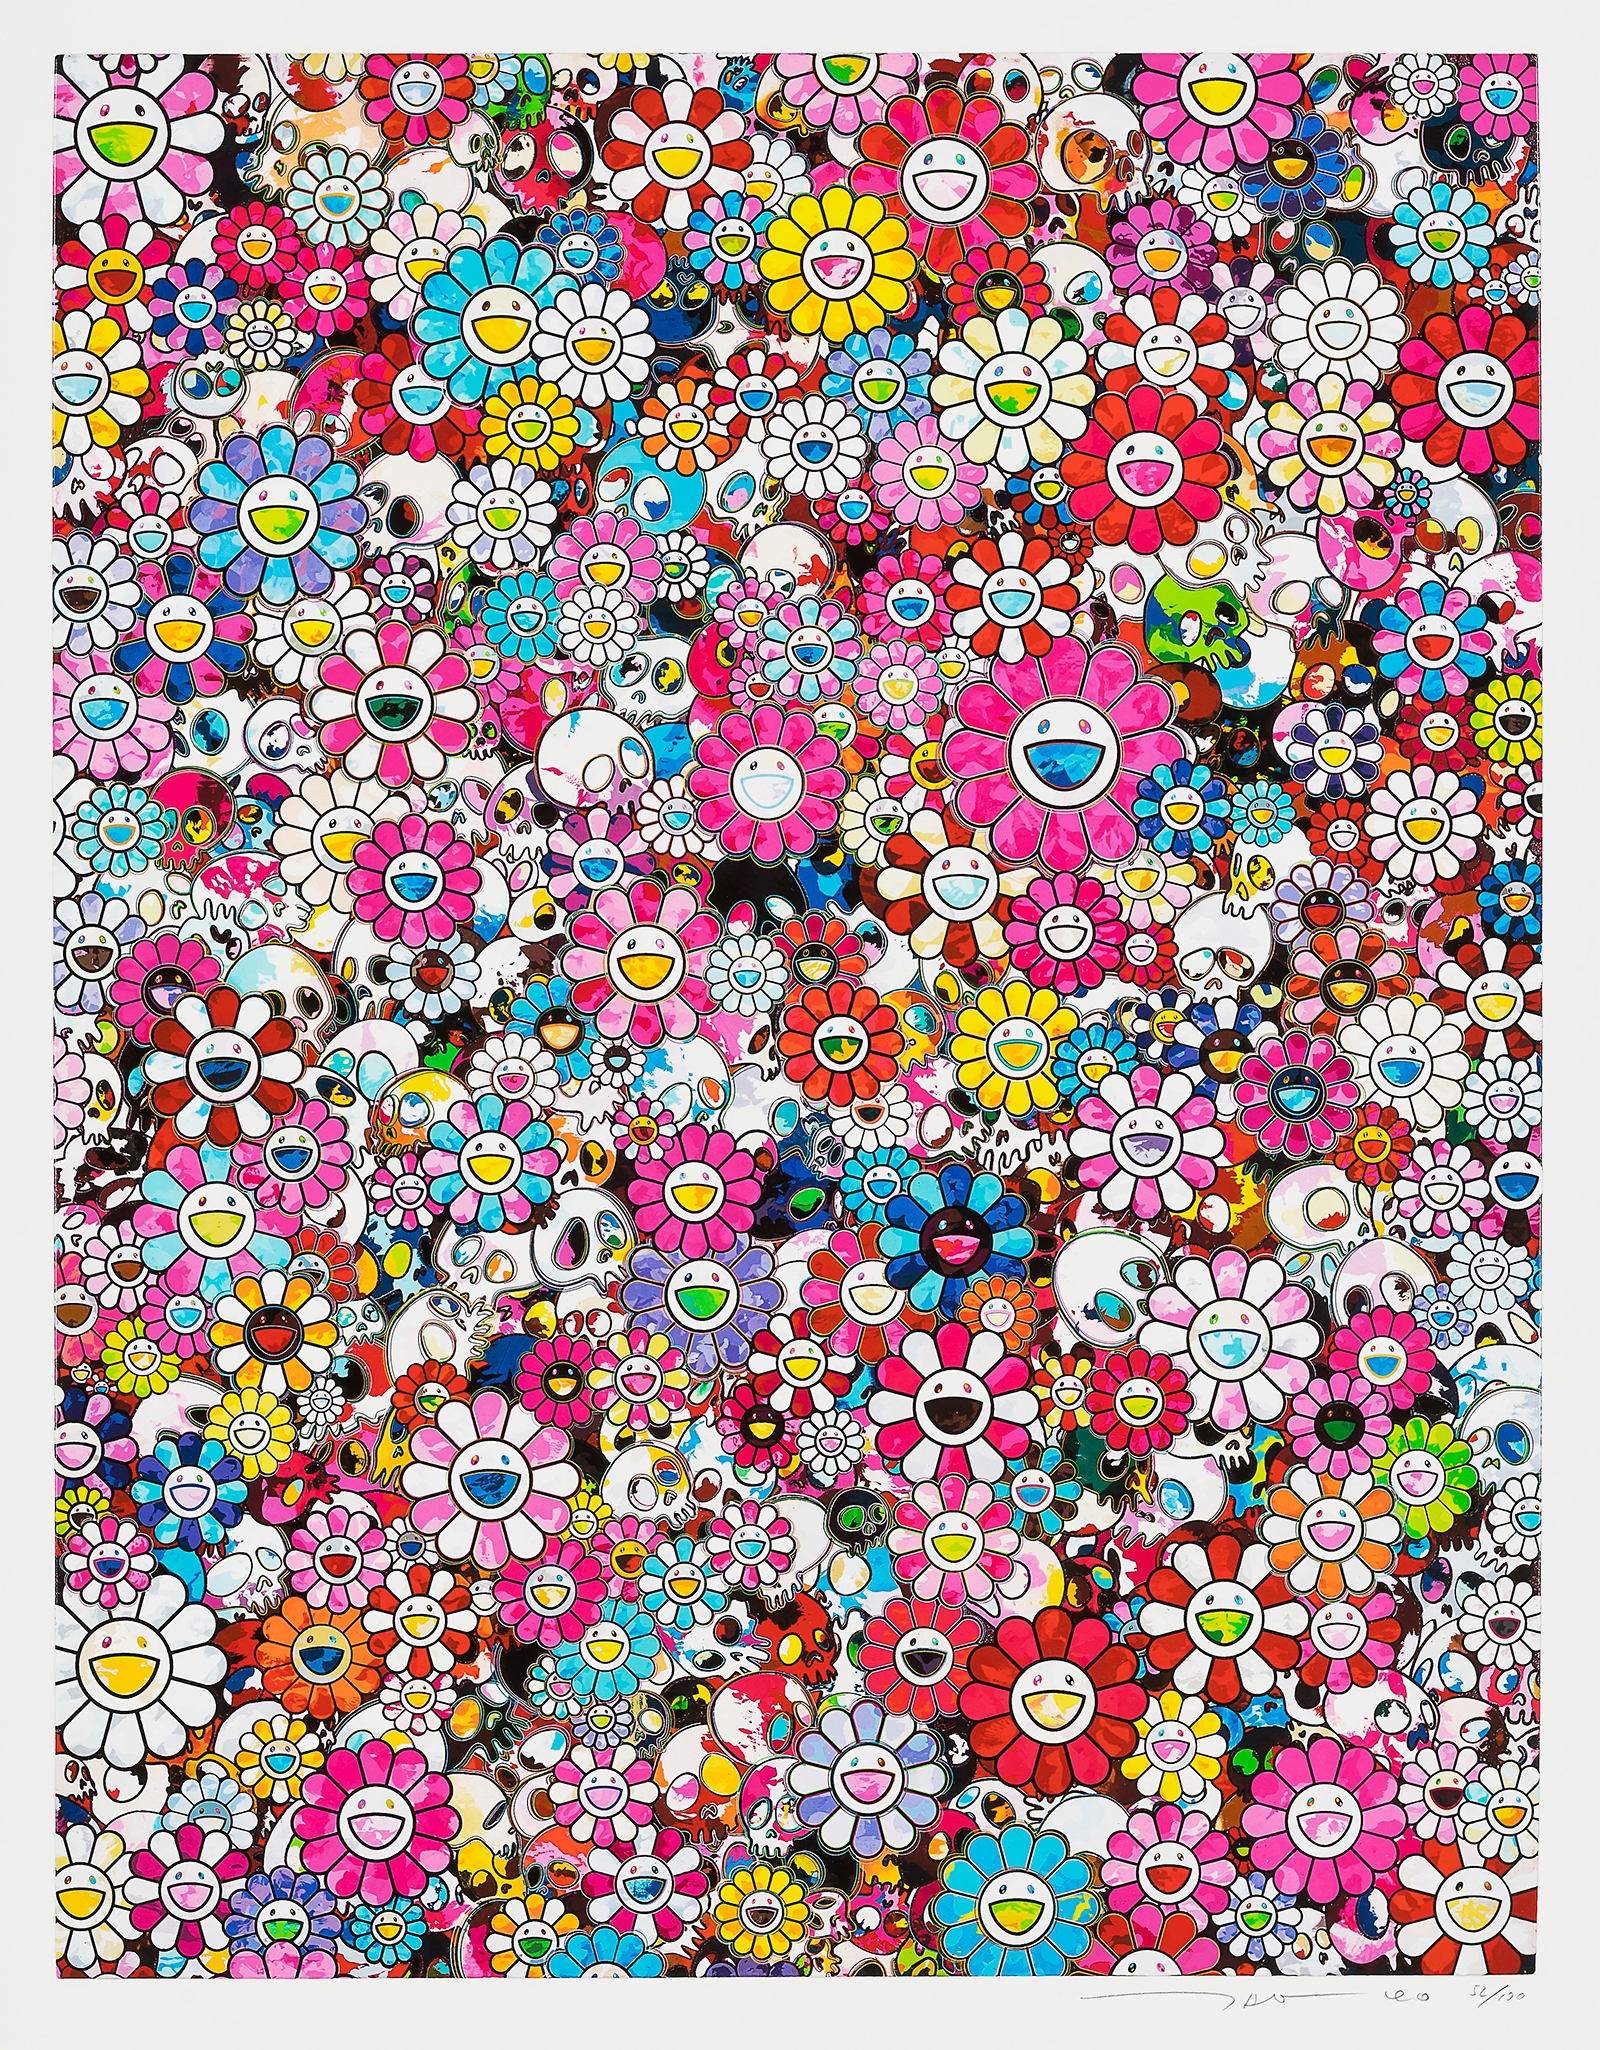 Takashi Murakami, Flowers with Smiley Faces (2013)